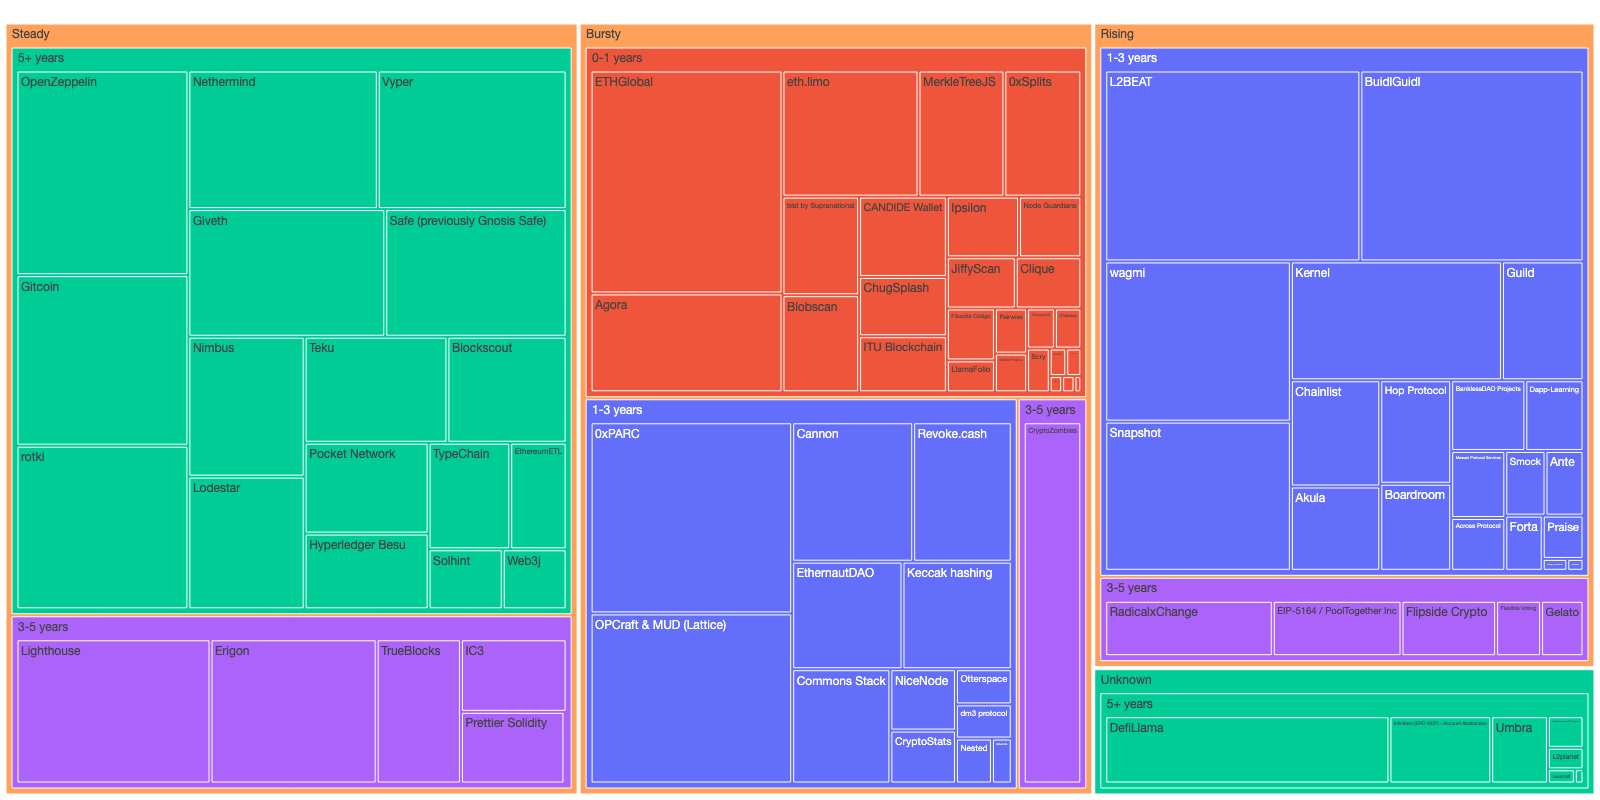 Treemap of projects, based on Github momentum and active years